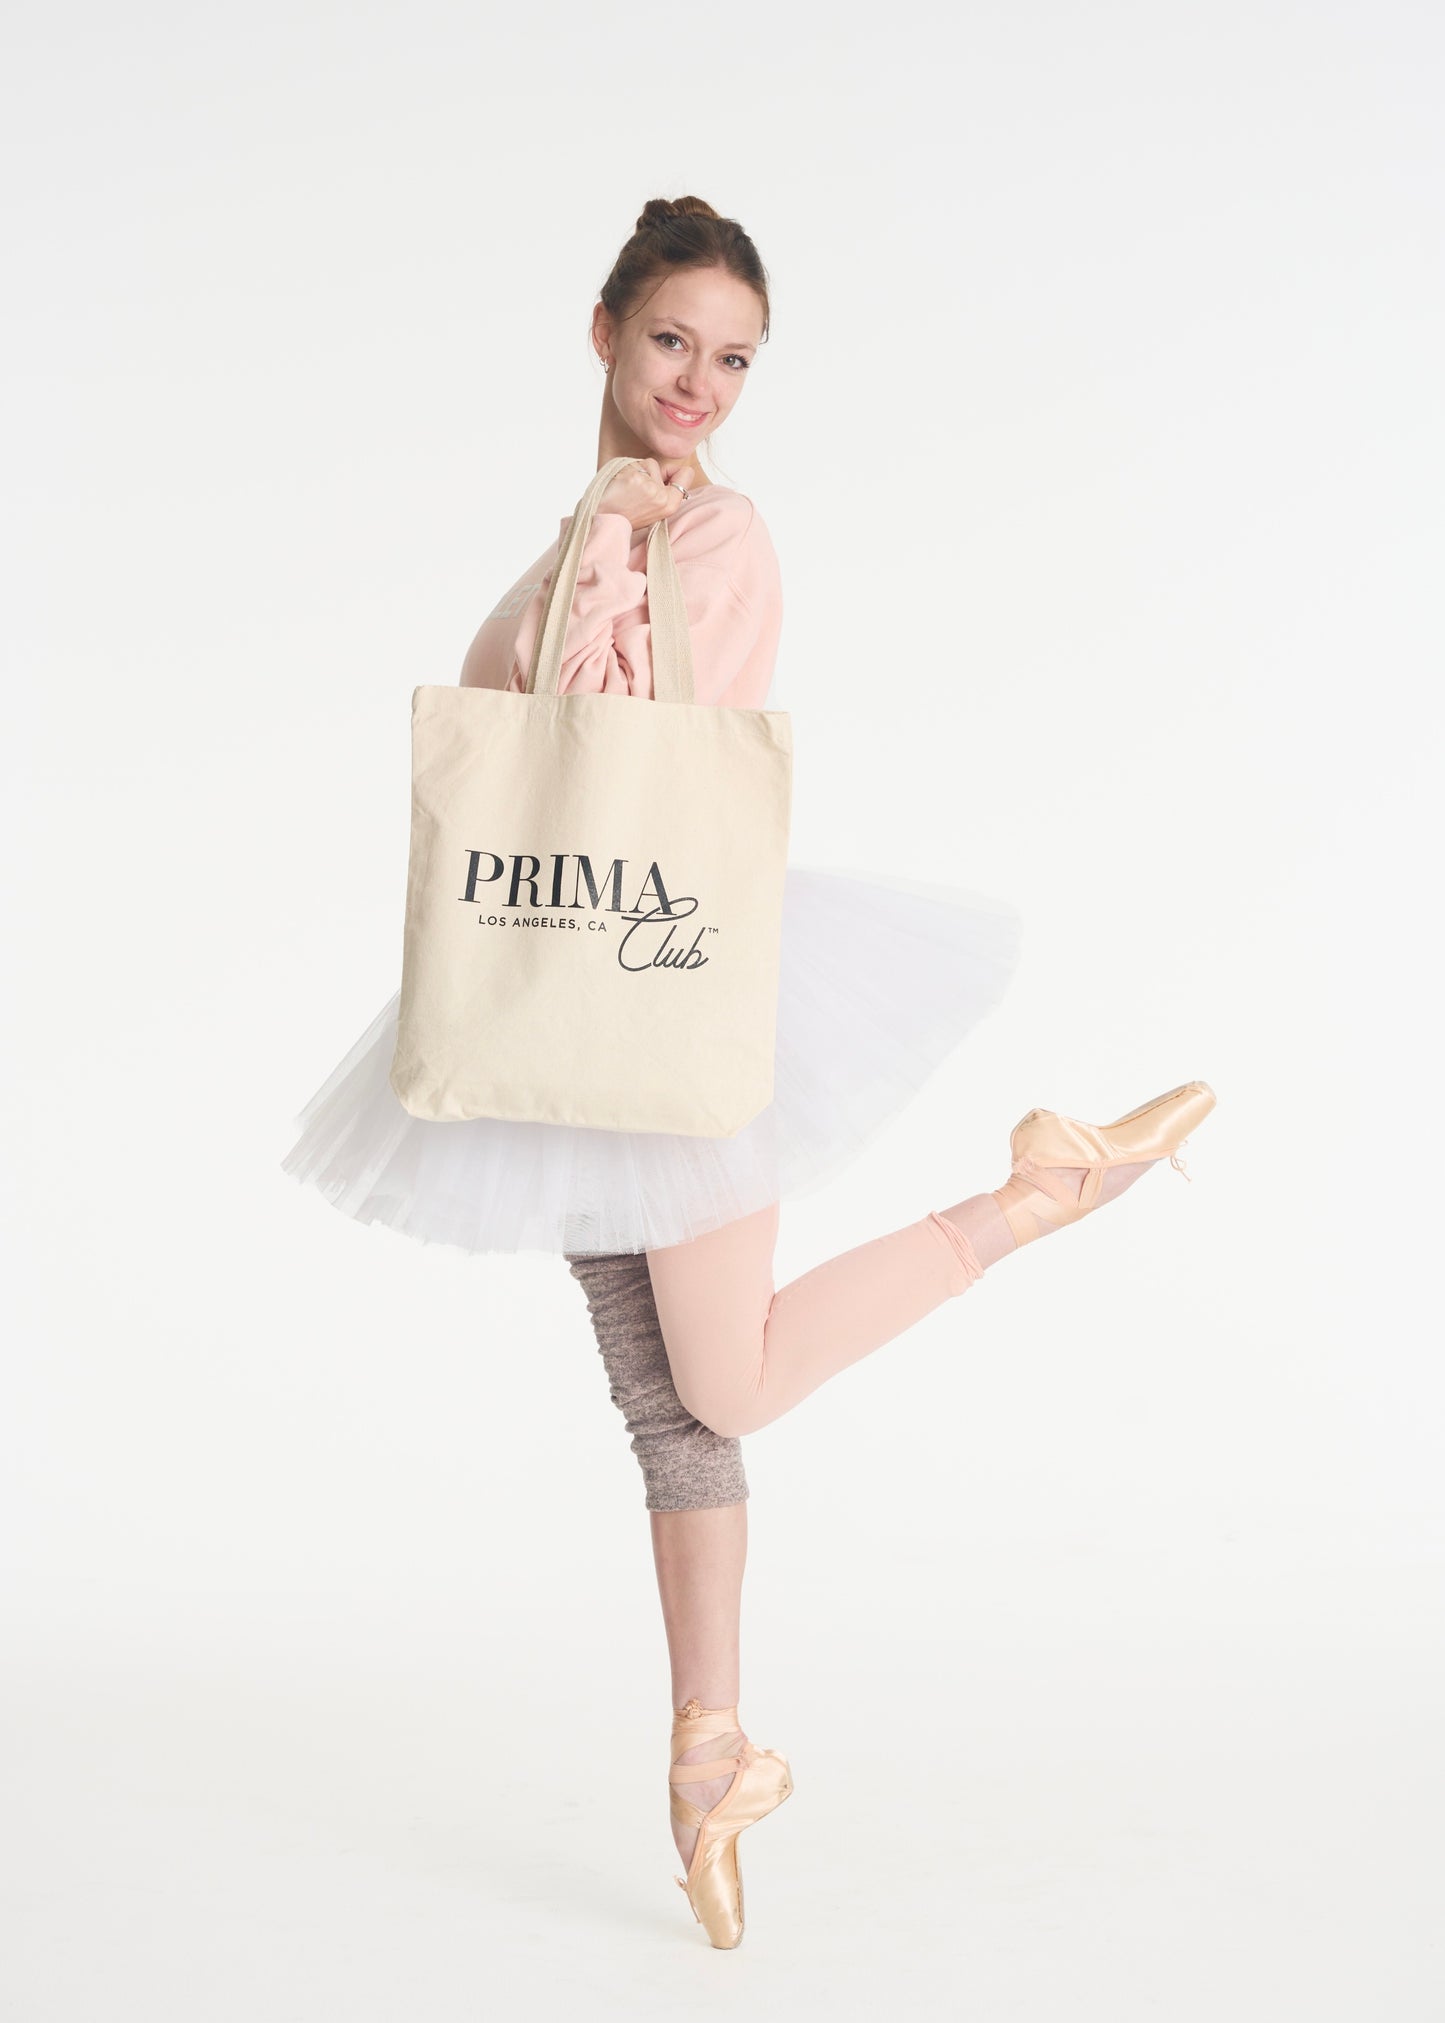 model holding canvas tote bag with Black Prima Club Logo